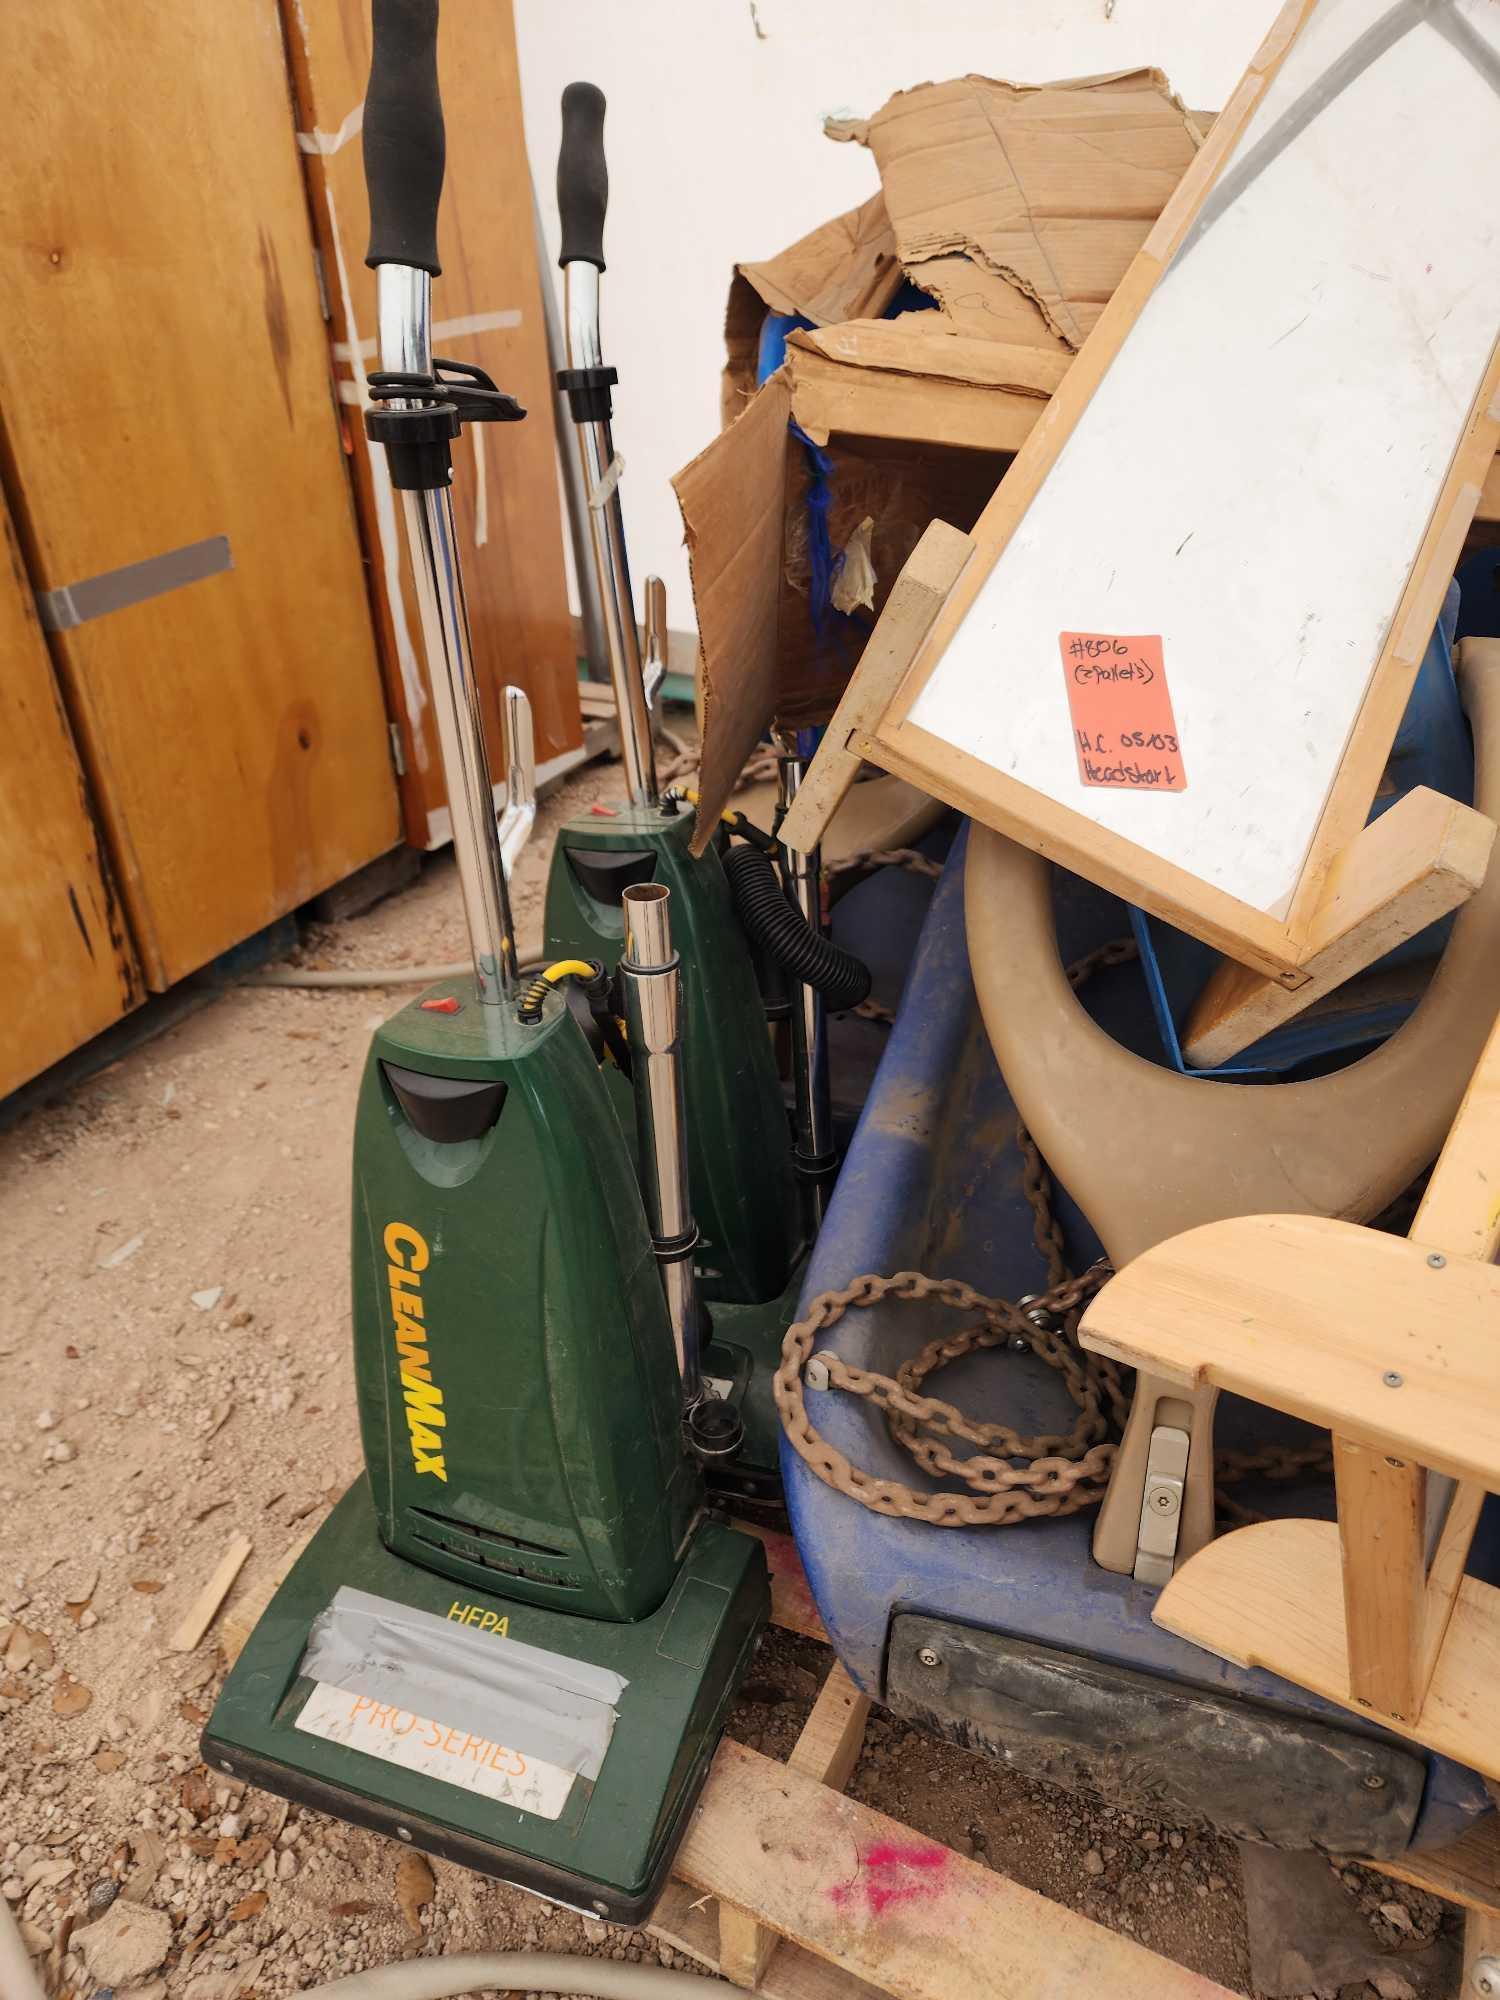 (2) CleanMax Vacuum Cleaners, Group of Outdoor Play Sets, (2) Children Mirrors